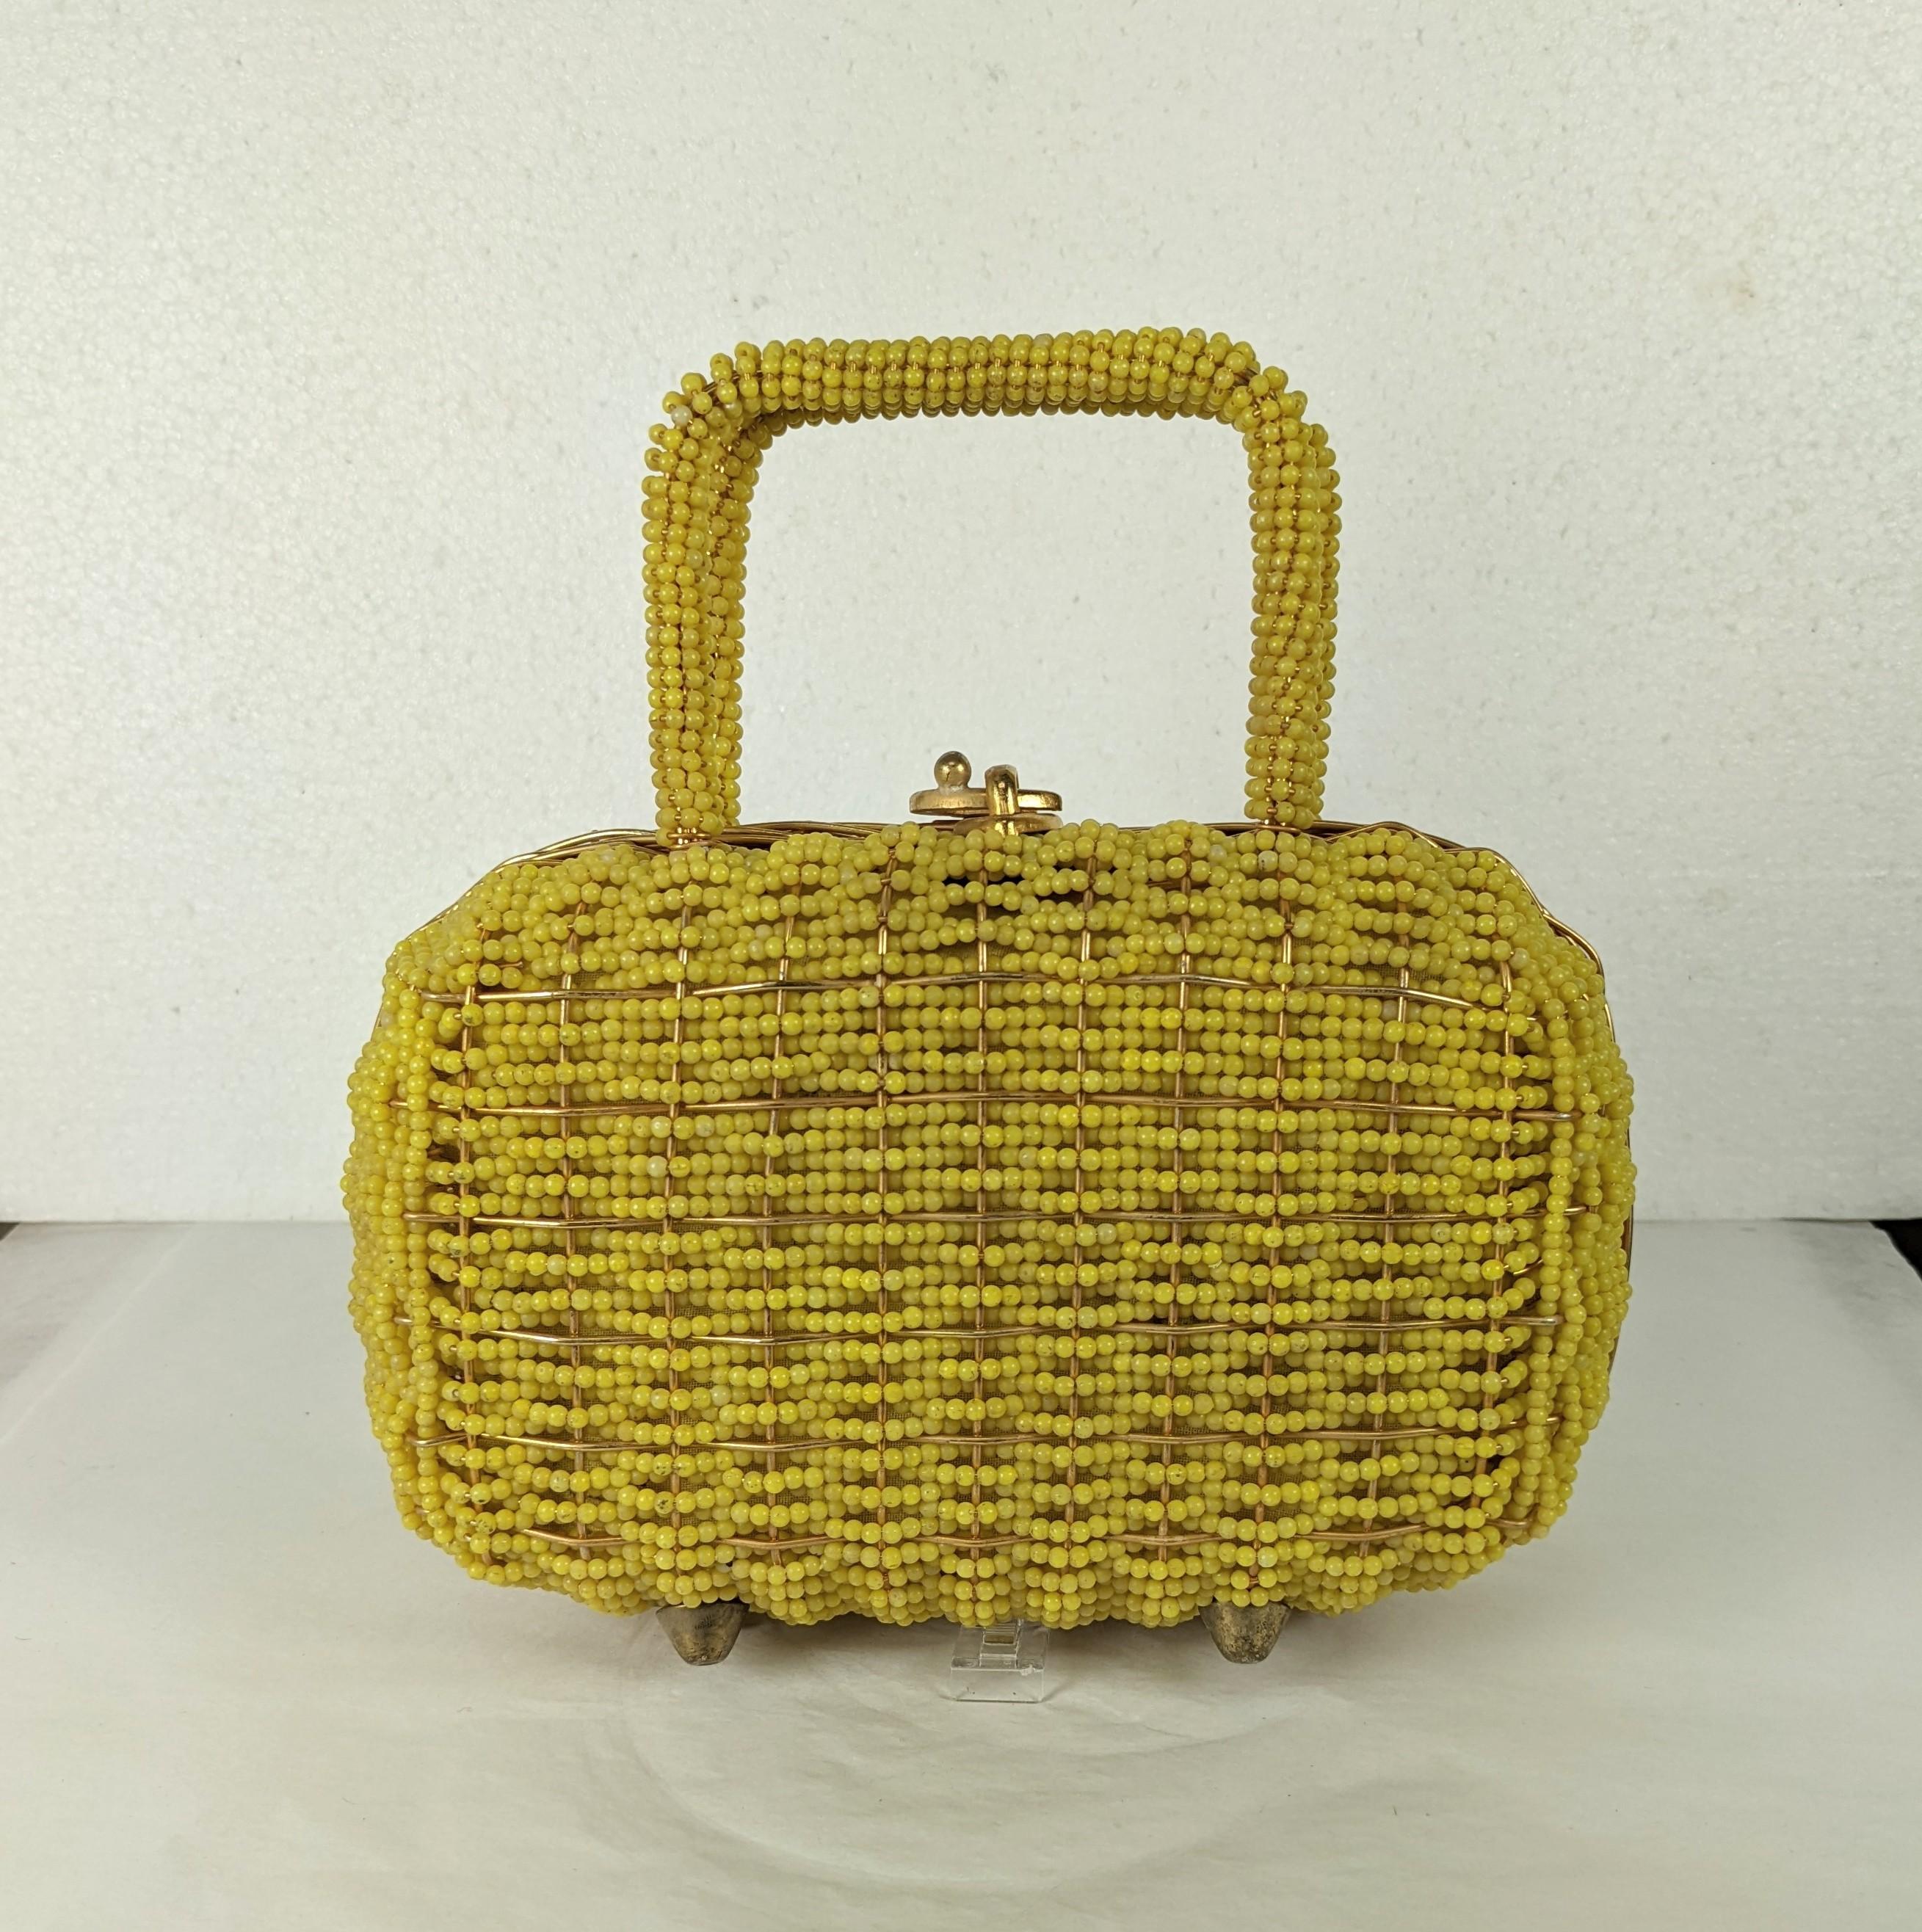 Walborg Beaded Top Handle Bag from the 1960's. Lined in gold metallic textile. Entire bag is hand beaded with yellow plastic beads on a hard wired frame with gilt latch on top. 1960's. 7